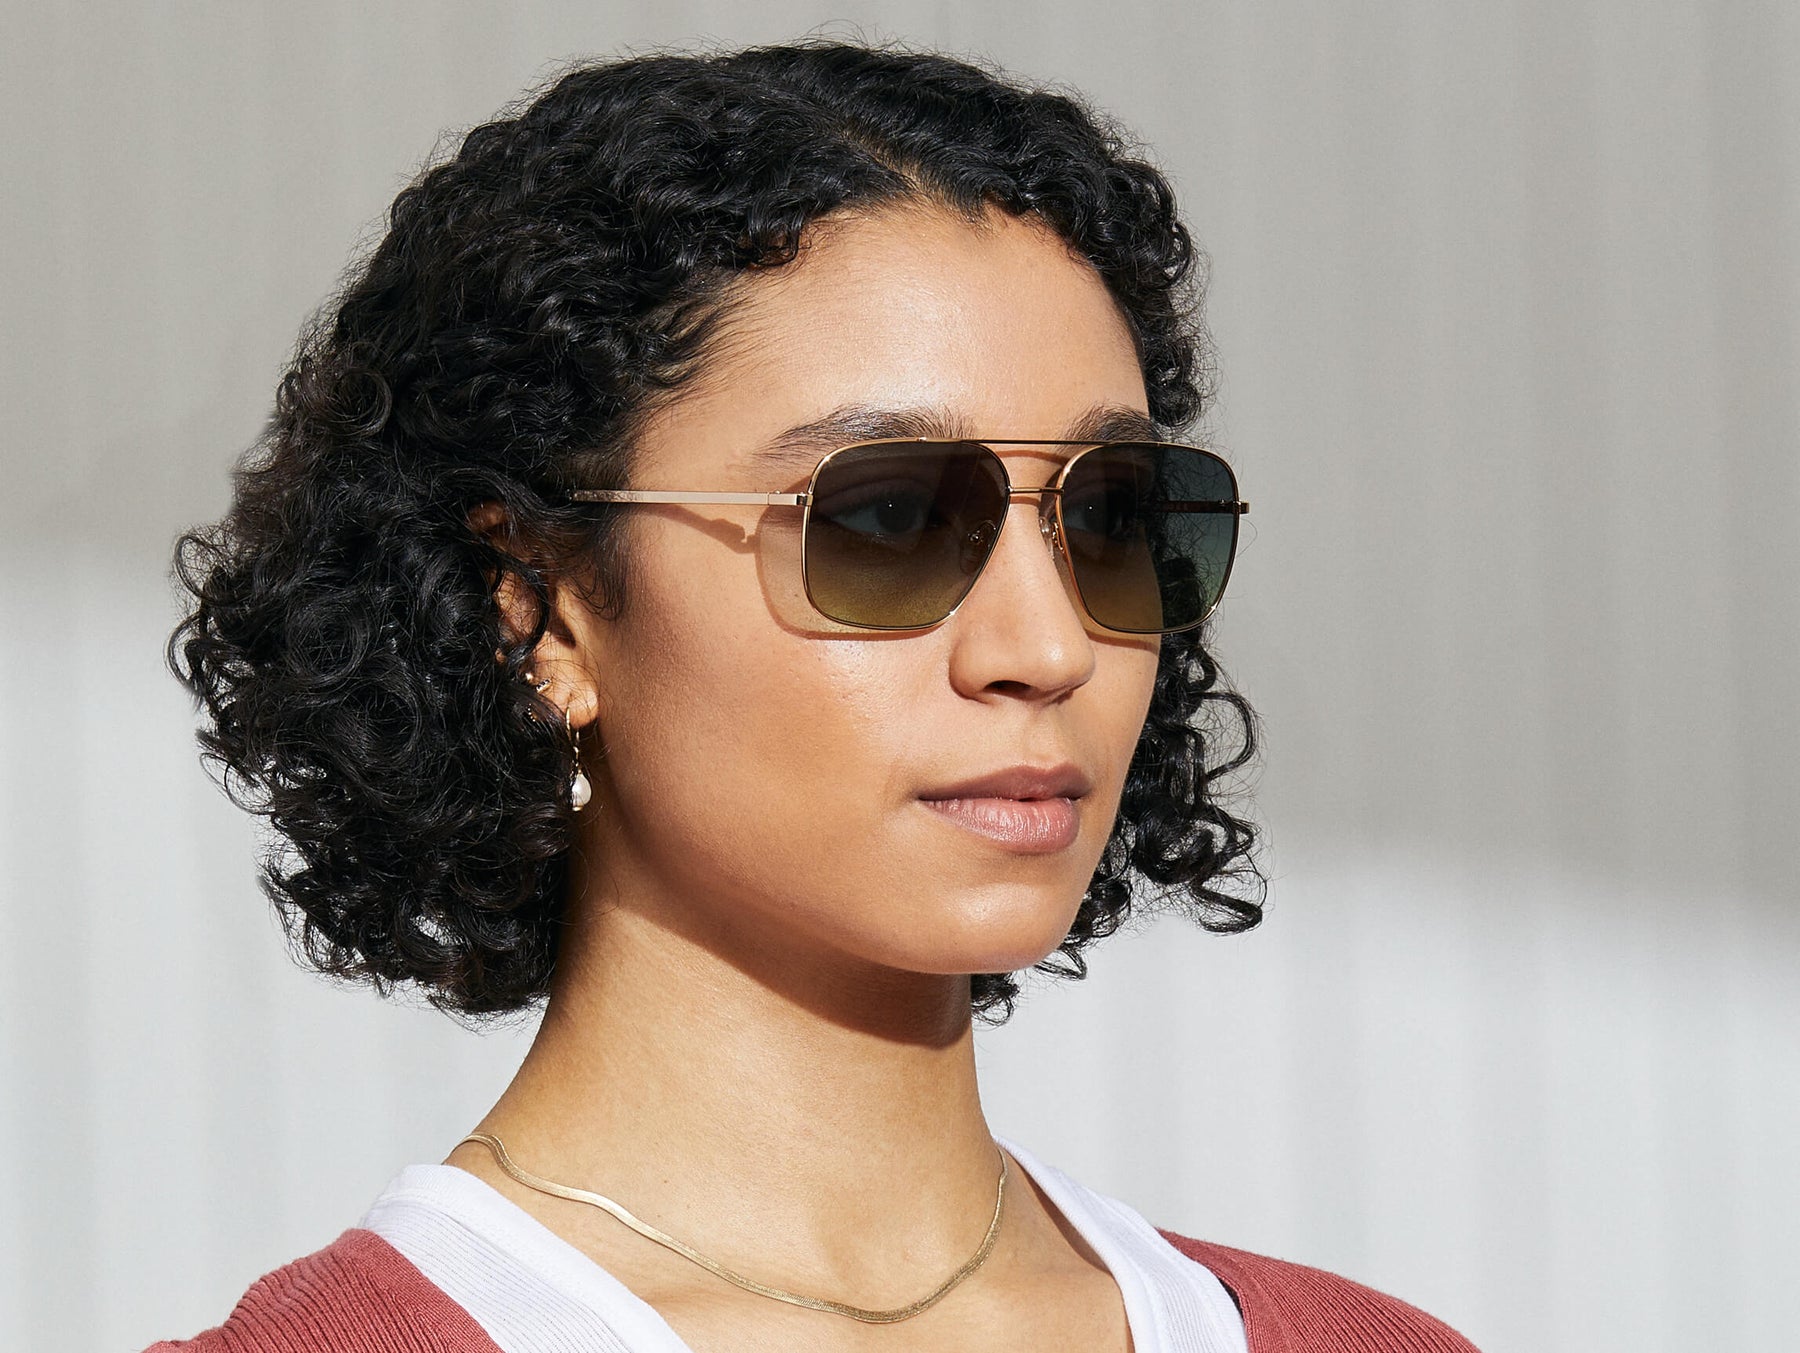 Model is wearing The SHTARKER in size 57 in Gold with Forest Wood Tinted Lenses